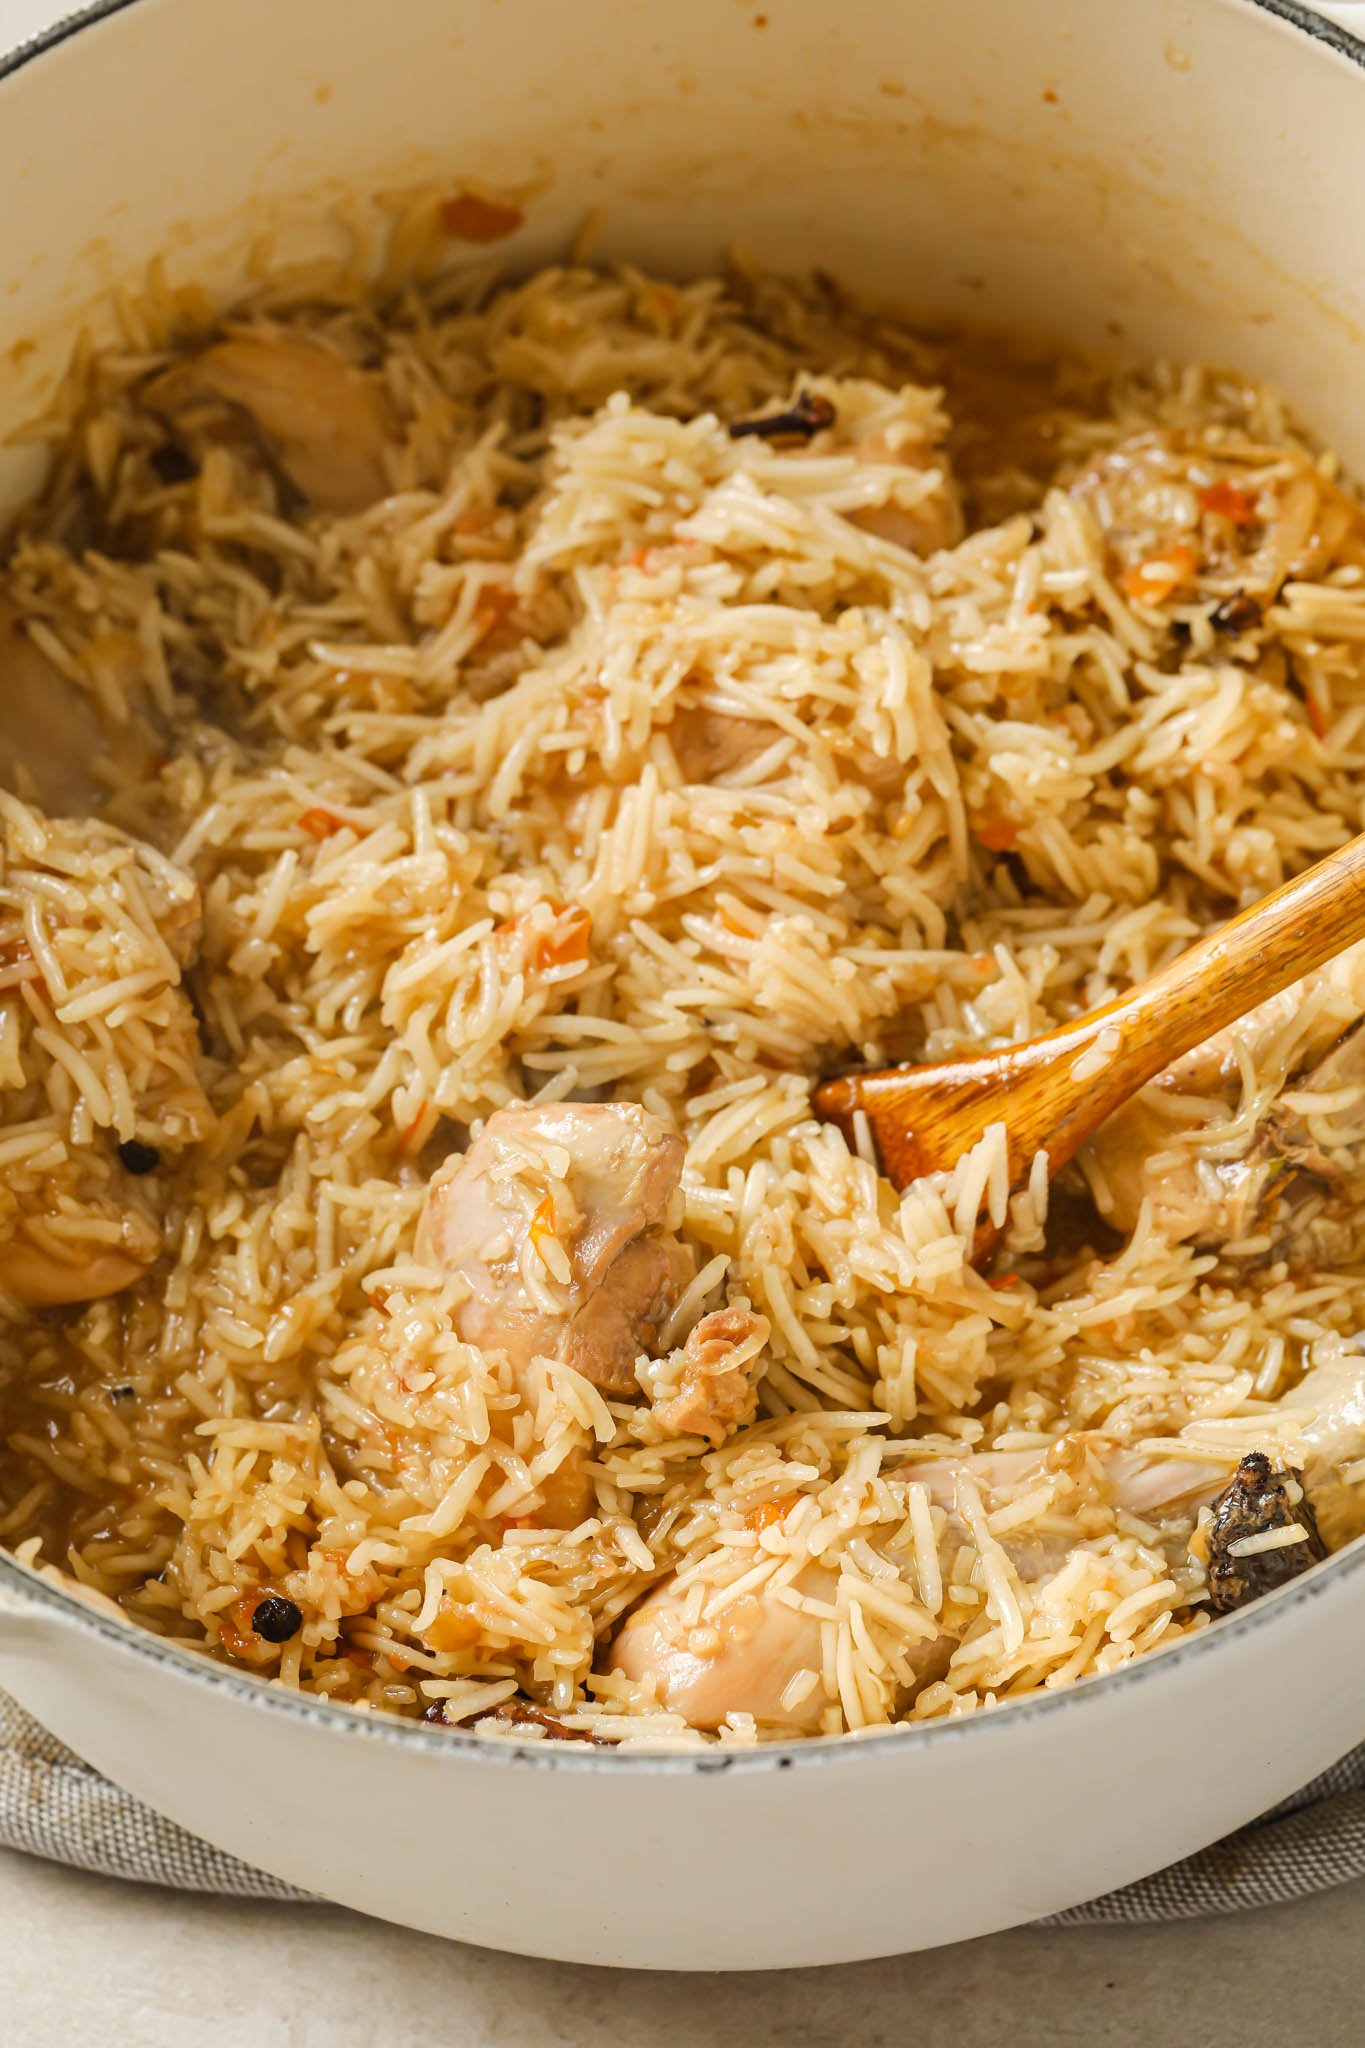 Chicken Yakhni Pulao ready for steaming.